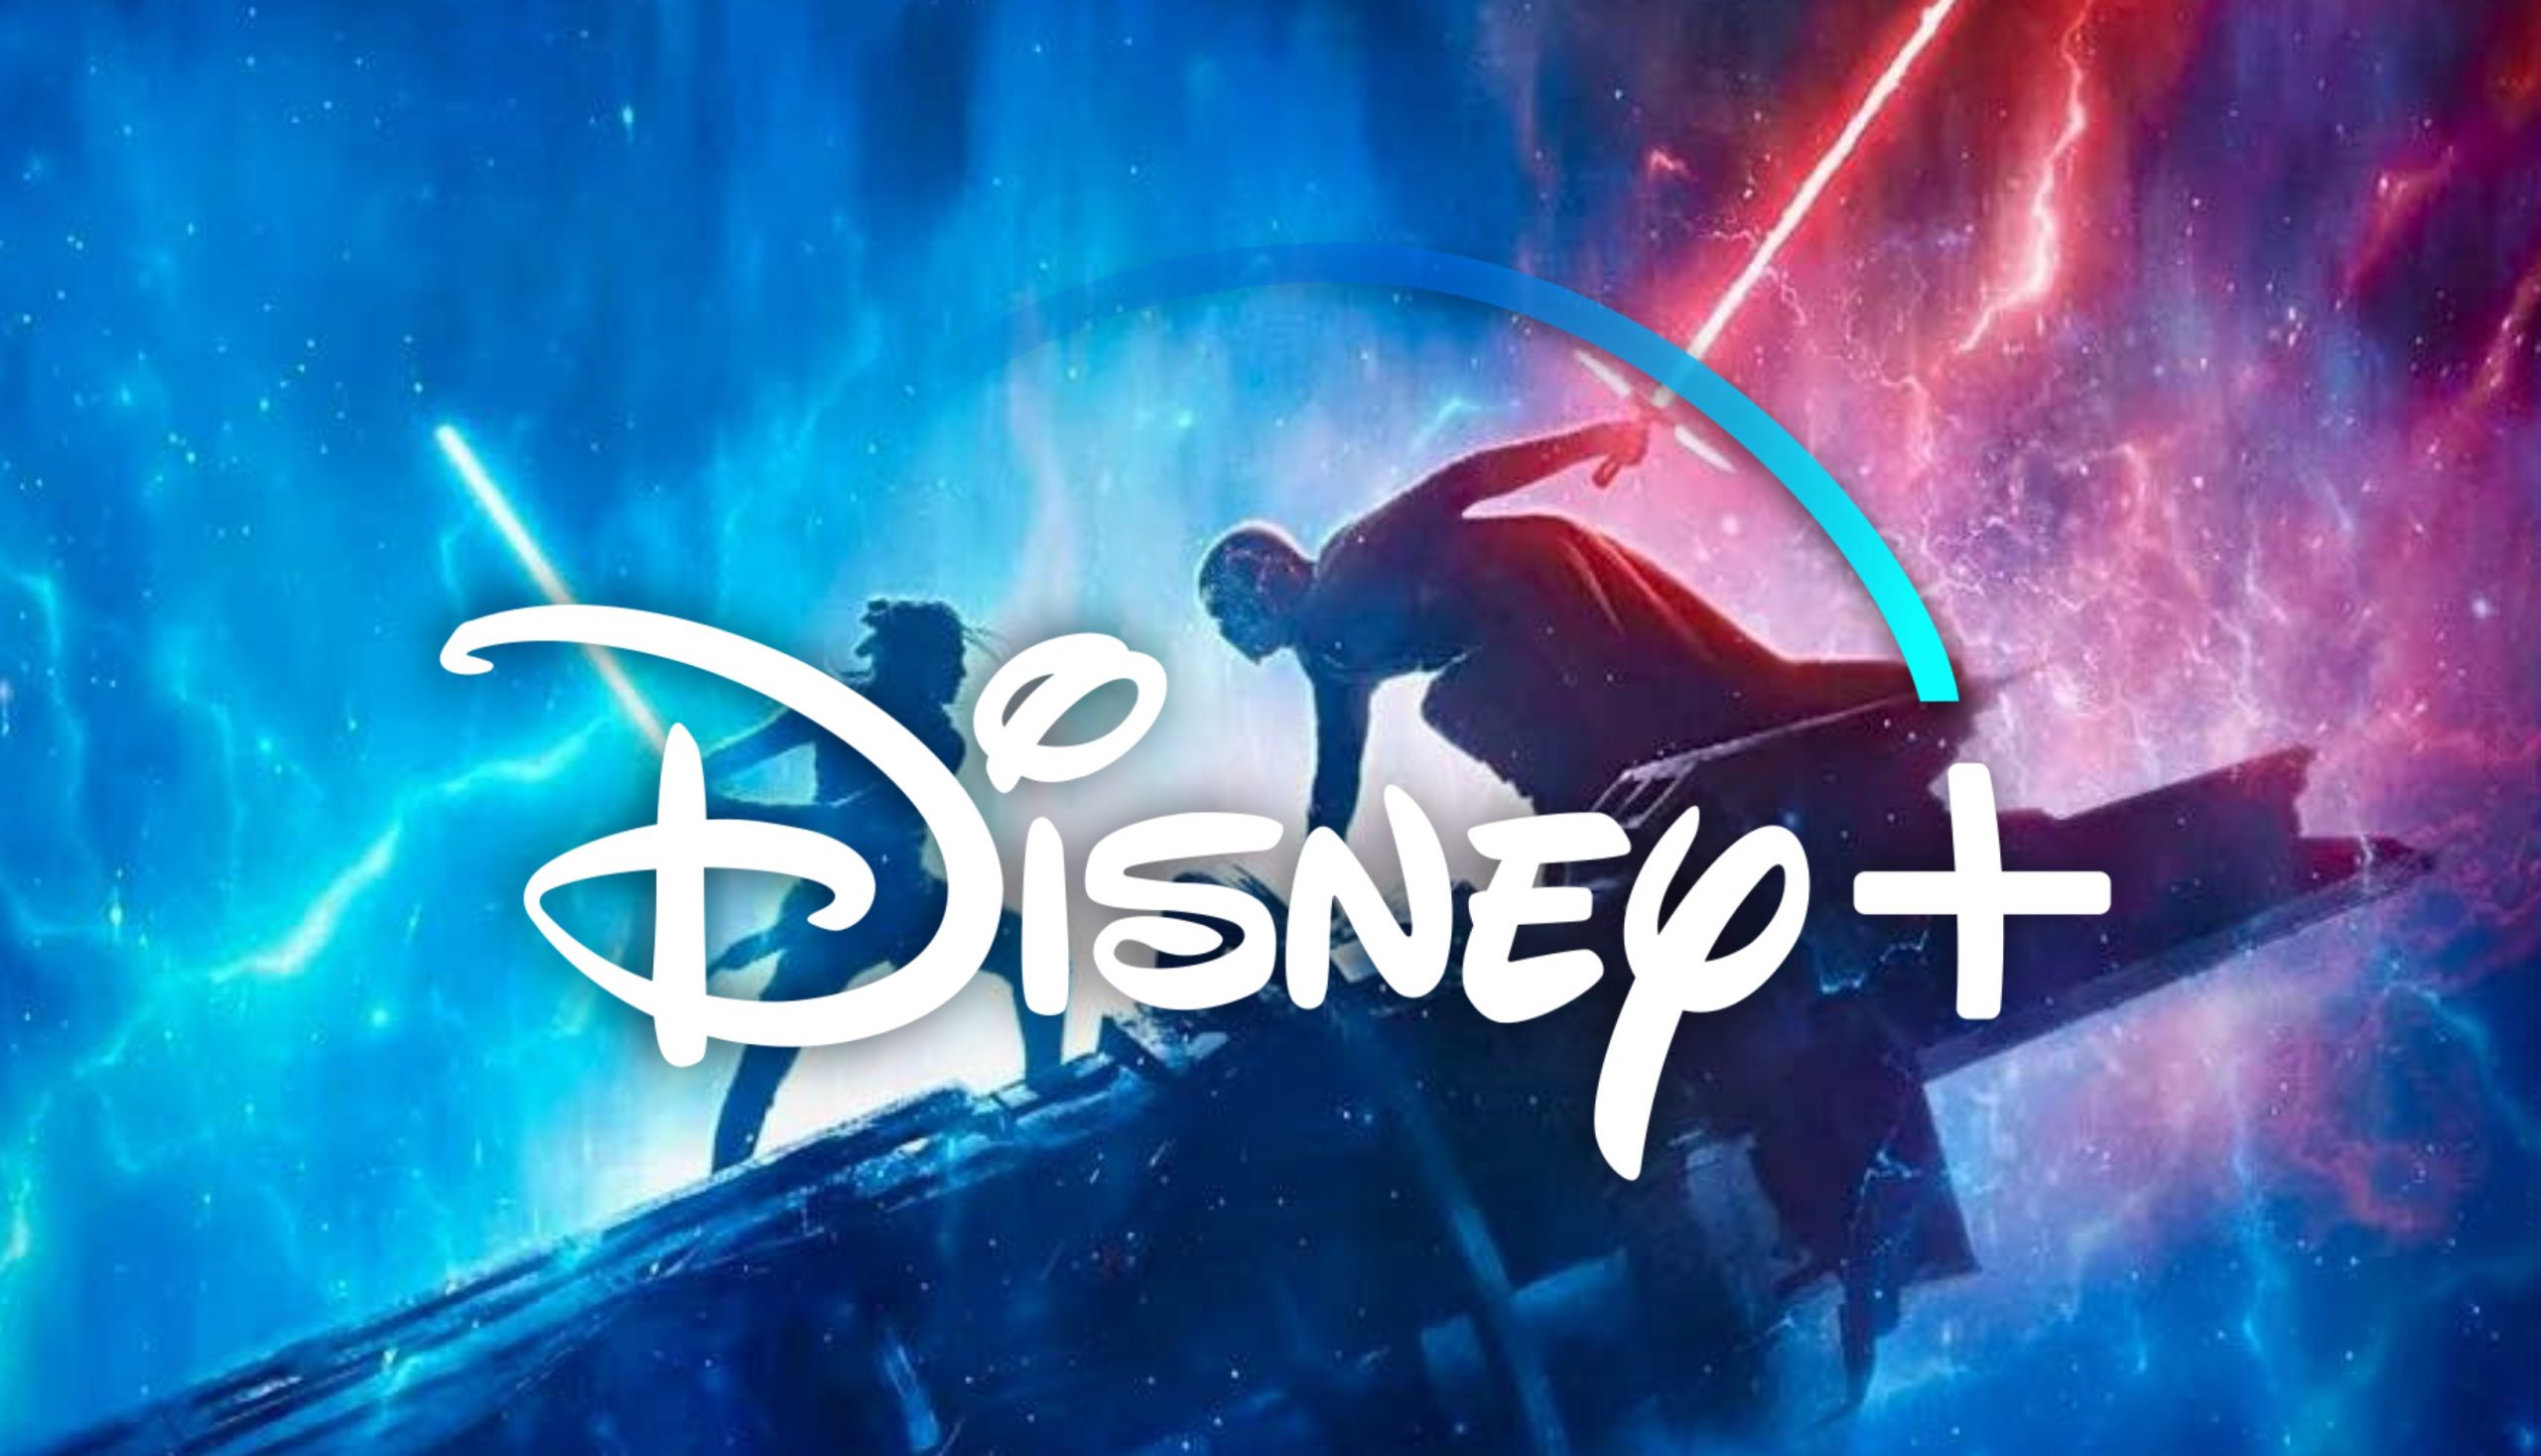 ‘Star Wars: The Rise of Skywalker’ May Premiere on Disney+ for Star Wars Day